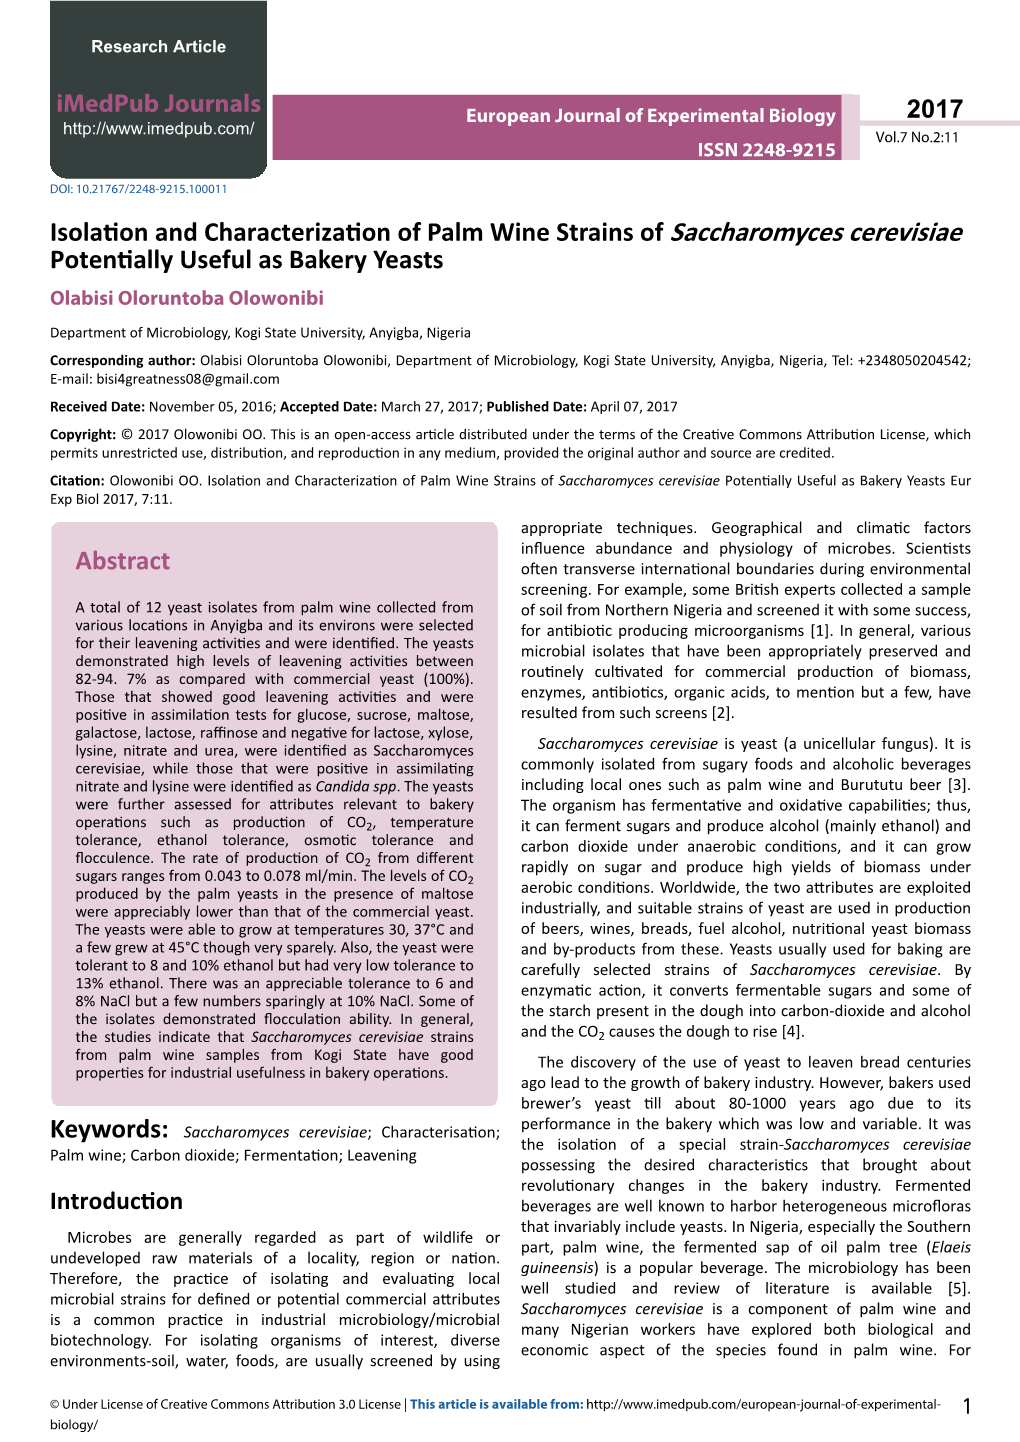 Isolation and Characterization of Palm Wine Strains of Saccharomyces Cerevisiae Potentially Useful As Bakery Yeasts Olabisi Oloruntoba Olowonibi